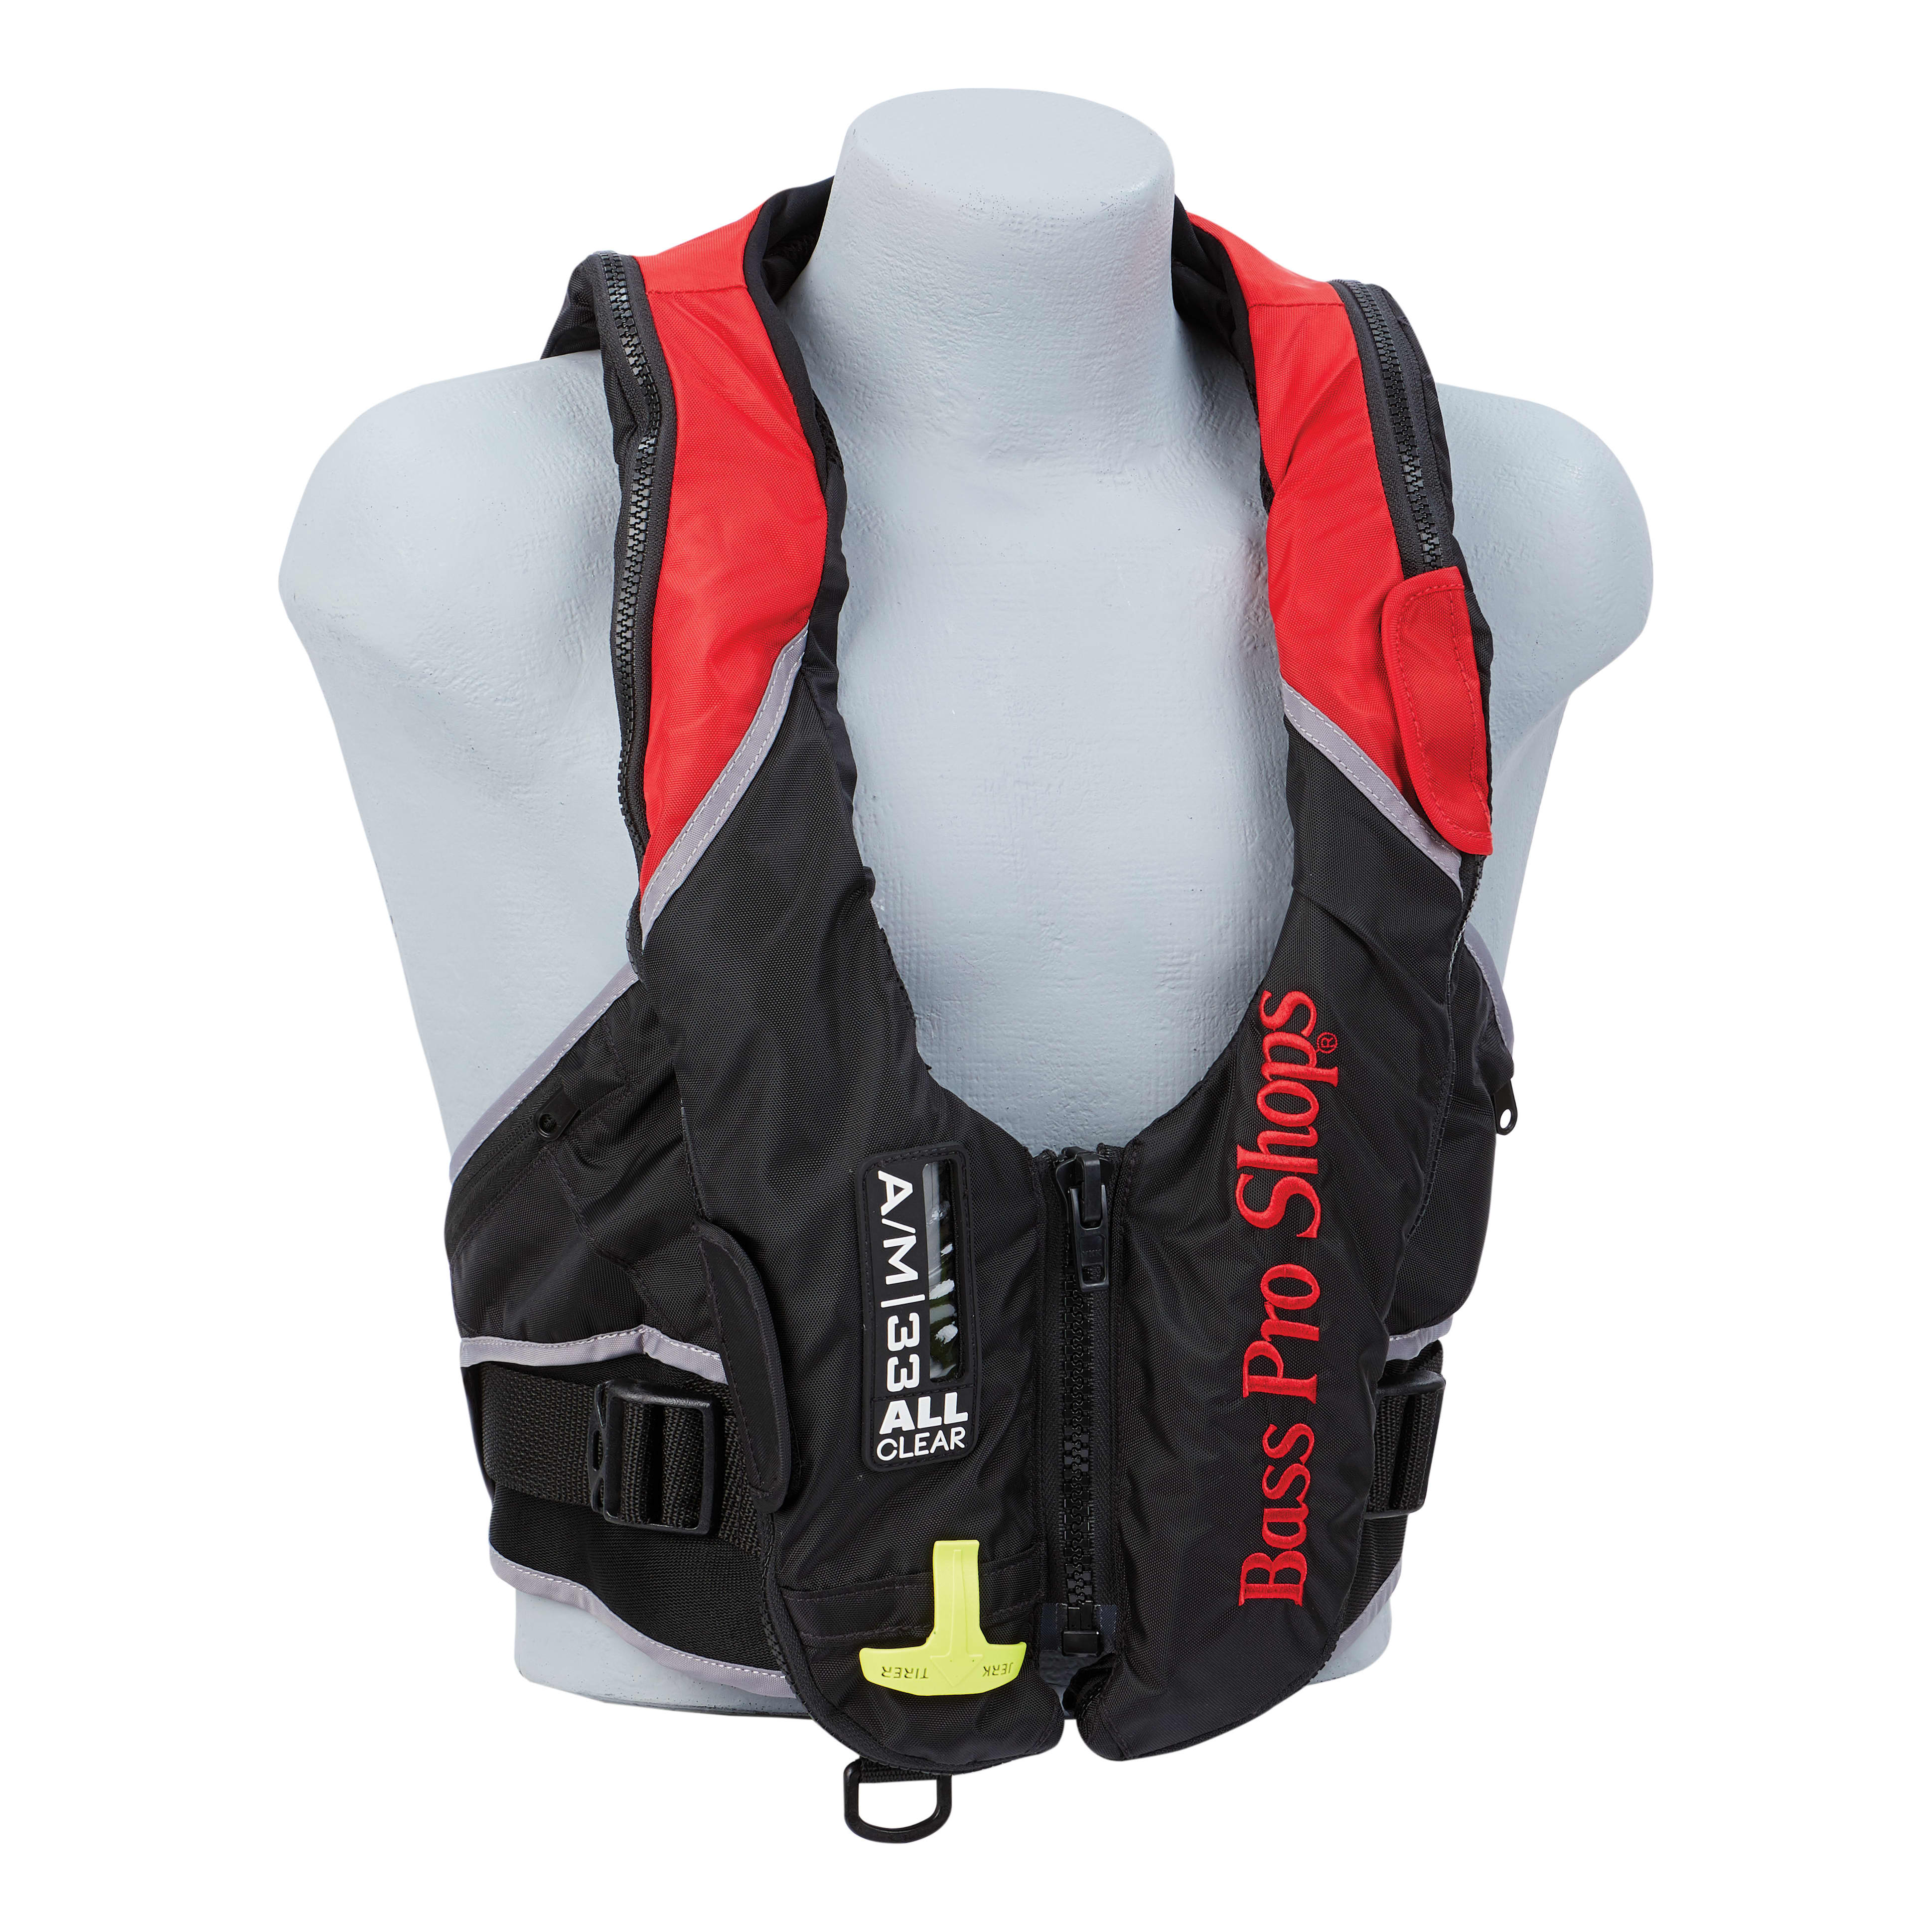 Bass Pro Shops® A/M-33 Deluxe All-Clear Inflatable Life Jacket - Red